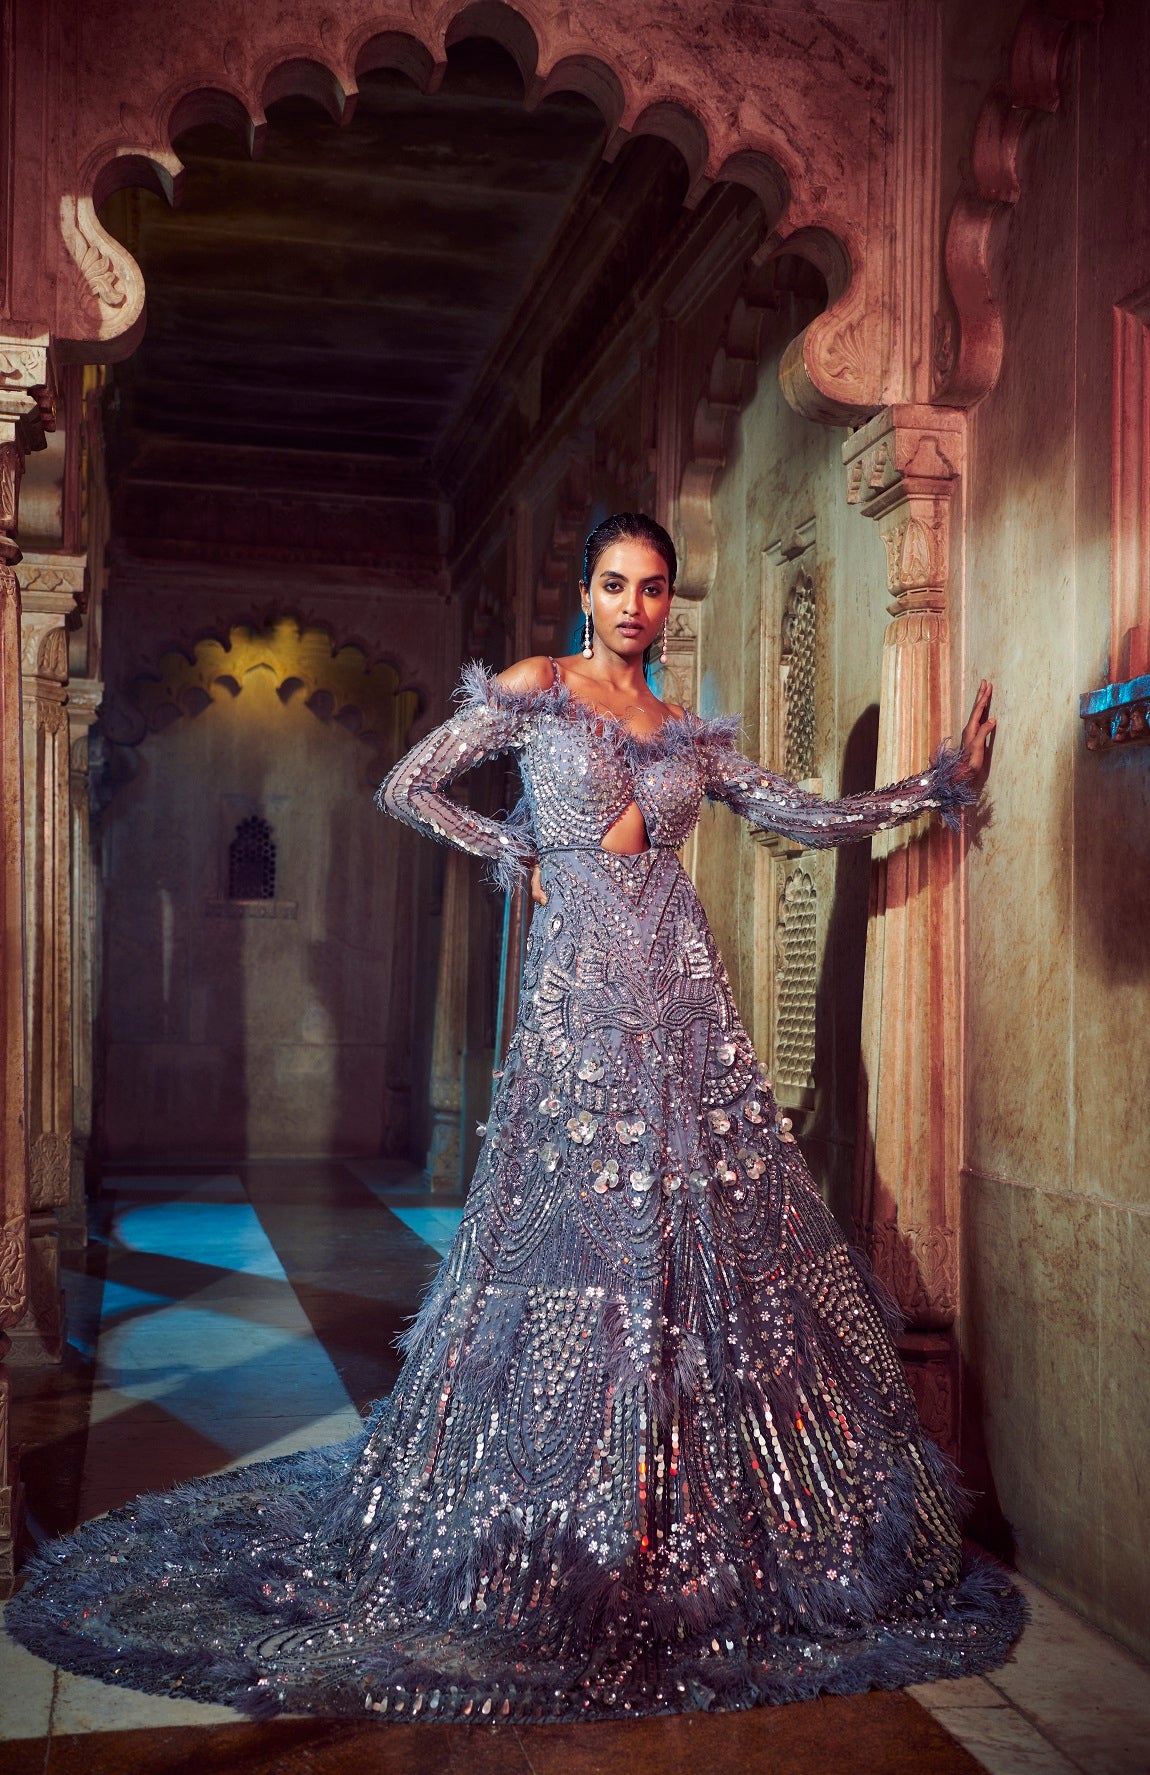 Grey Gown | Effortless grace meets intricate design in this bridal masterpiece.